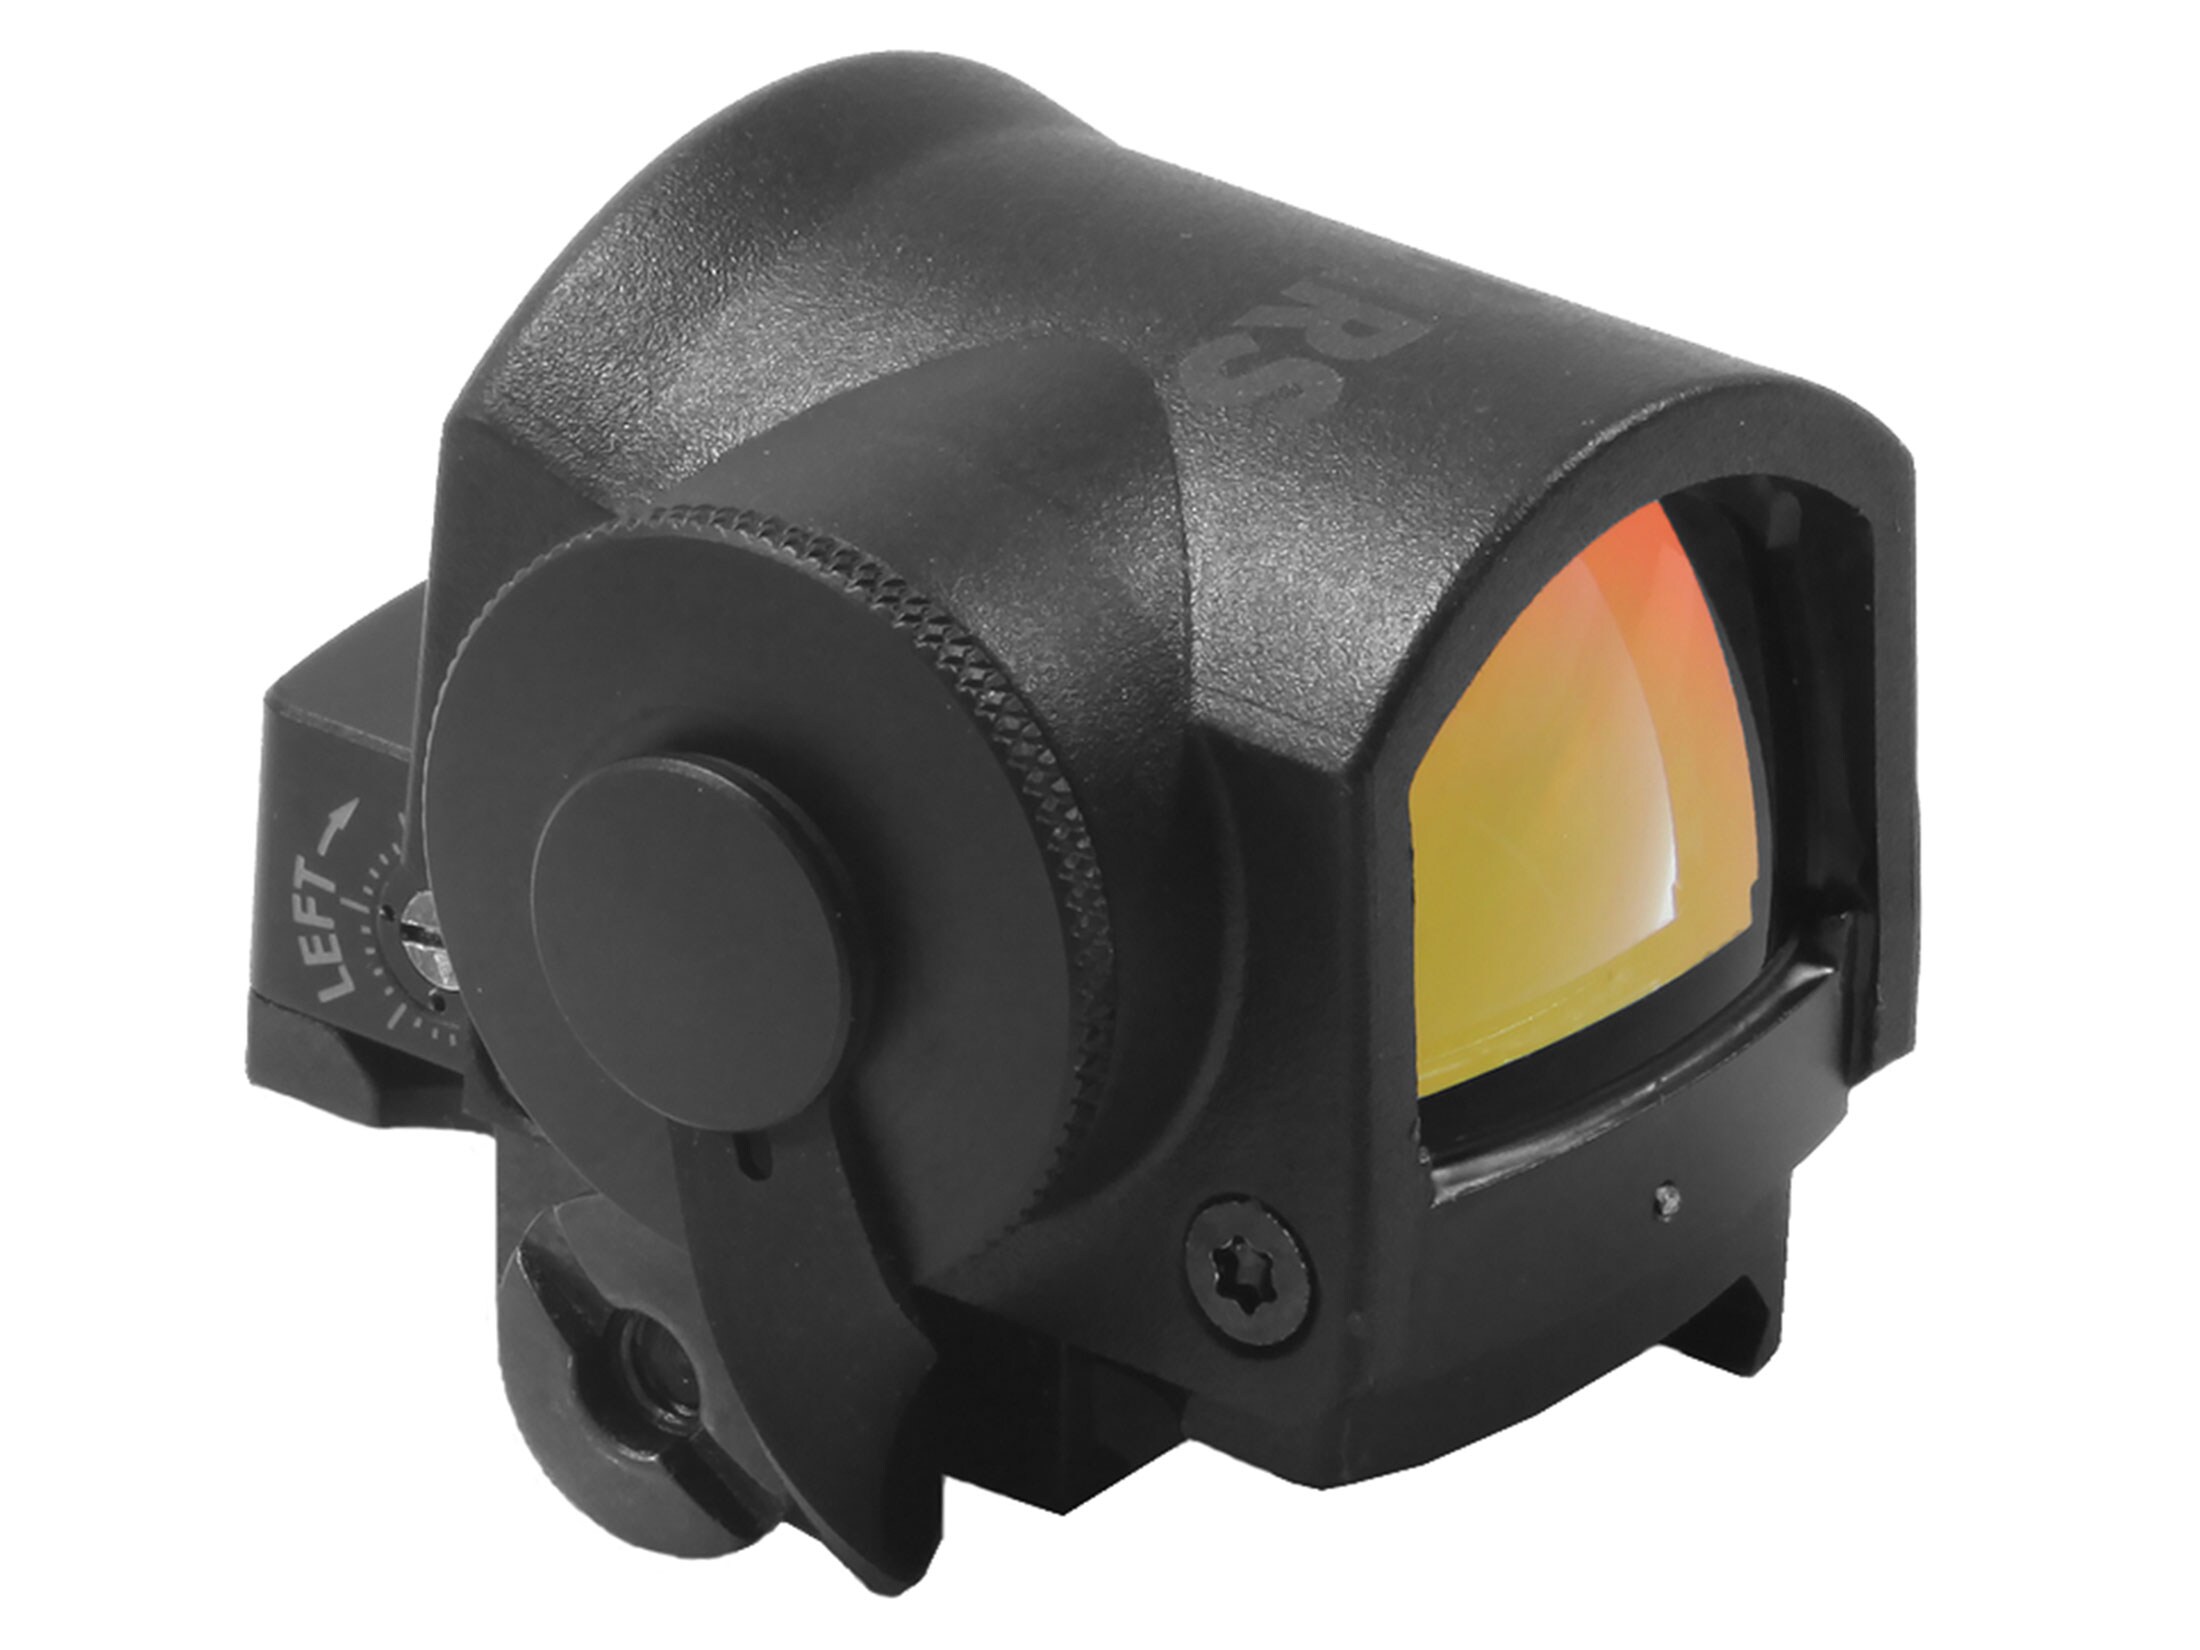 Steiner MRS Micro Reflex Red Dot Sight 1x 3 MOA Dot Picatinny-Style Mount Matte For Sale